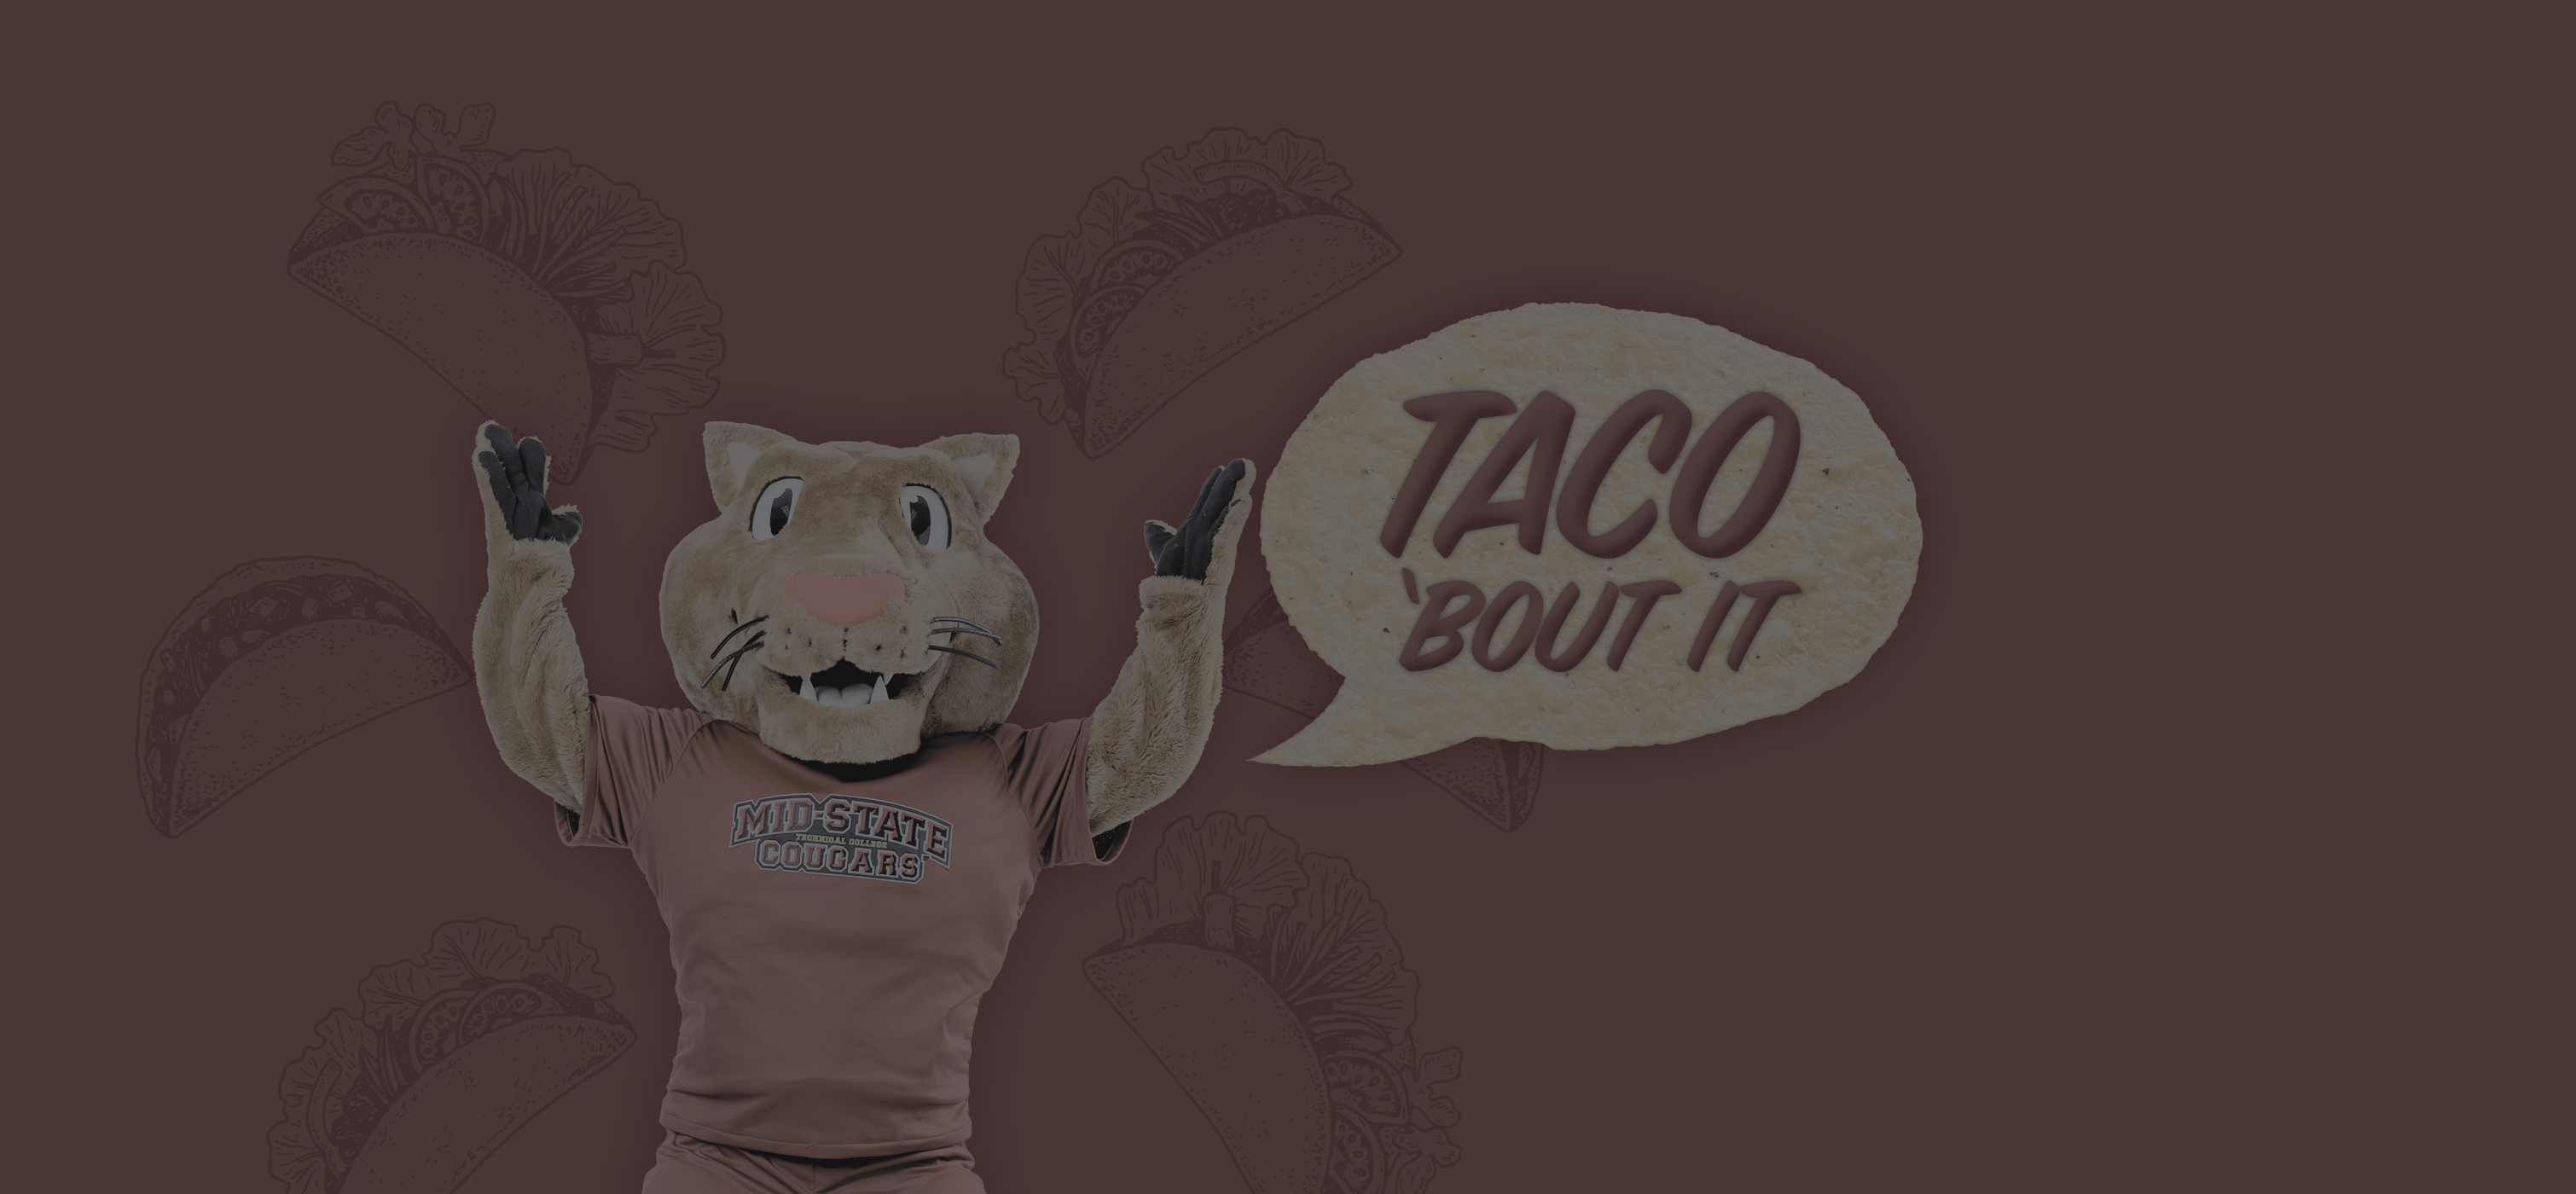 Grit with a speech bubble next to him that says "Taco 'Bout it"